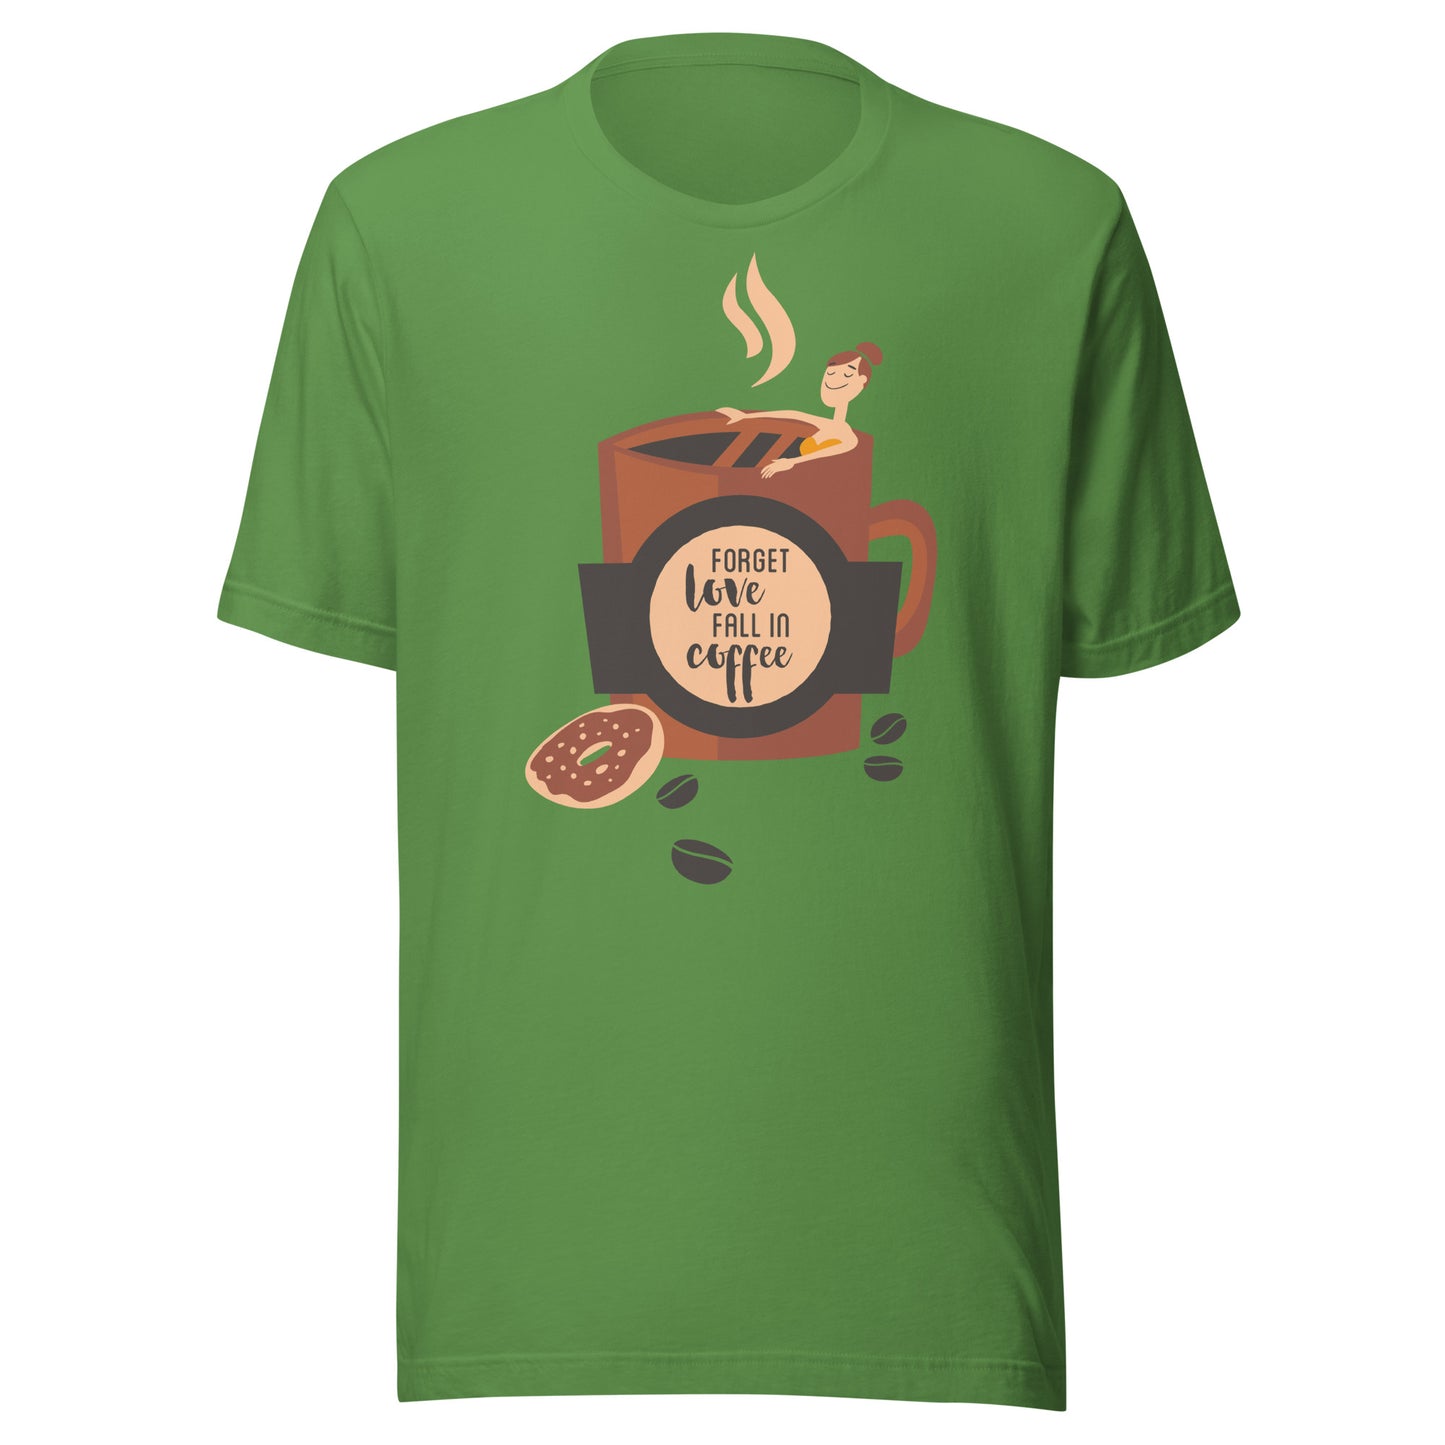 Forget Love Fall In Coffee T-shirt - Perfect for Coffee Lovers!